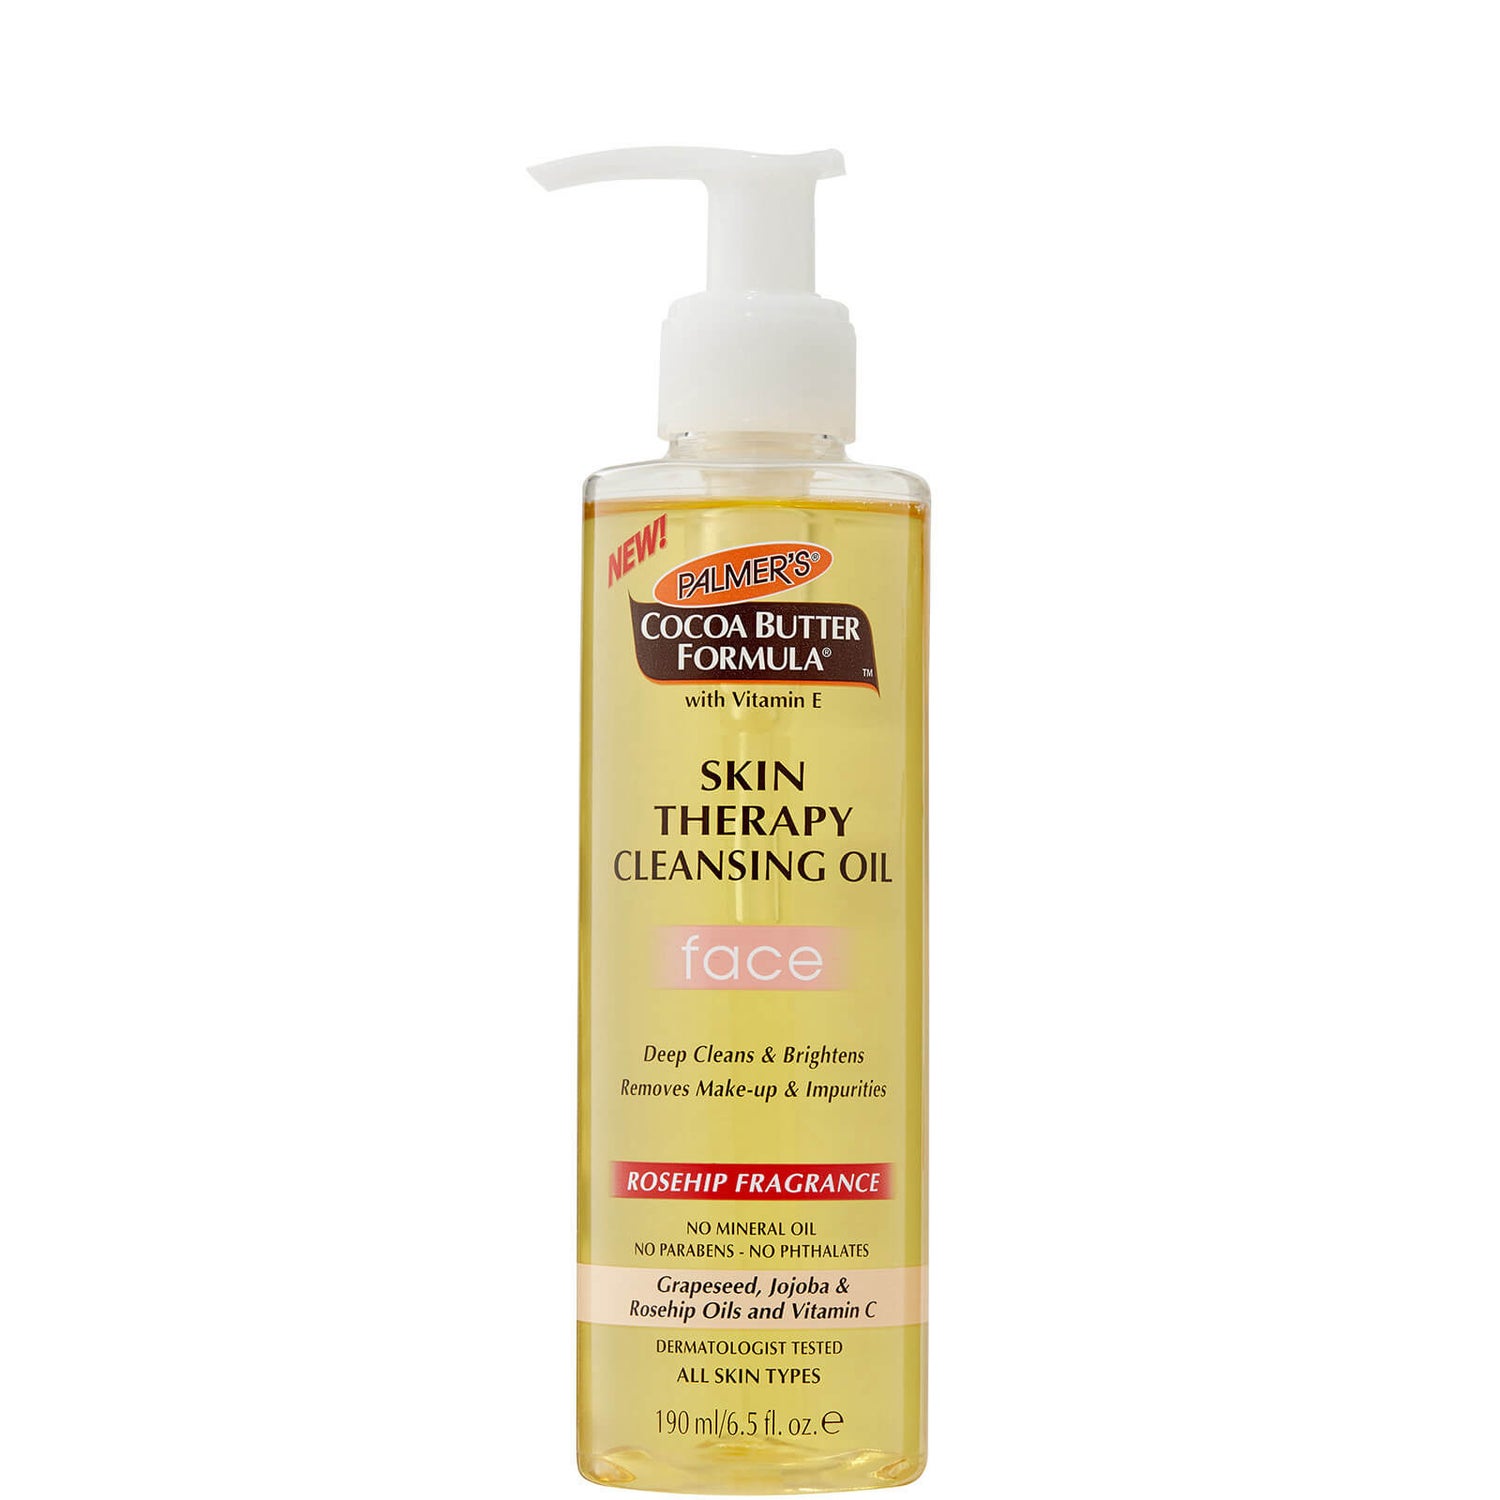 Palmer's Cocoa Butter Formula Skin Therapy Cleansing Oil Face 190ml